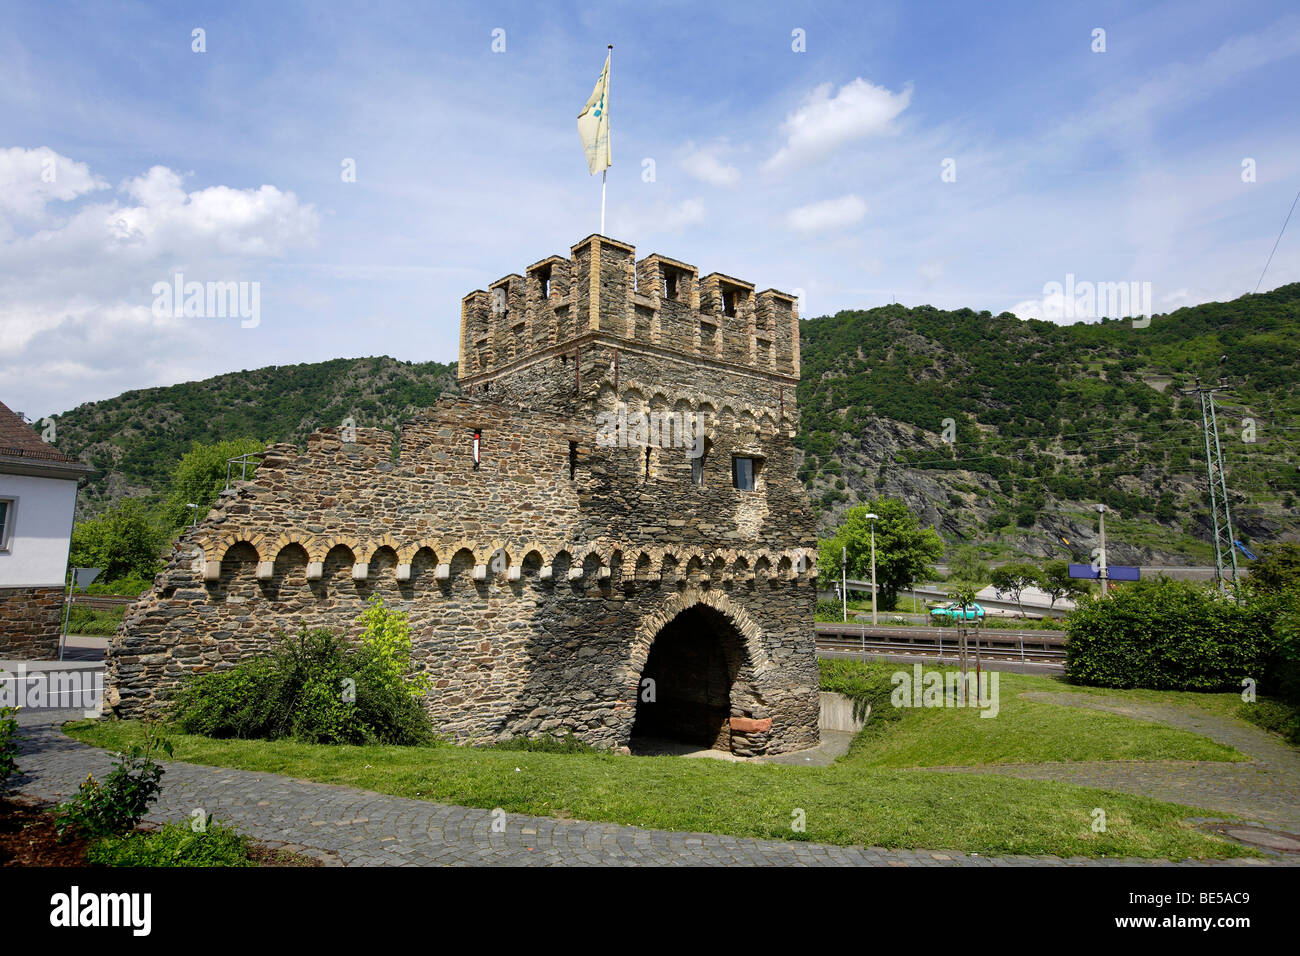 City tower and town wall in Oberwesel, Rhineland-Palatinate, Germany, Europe Stock Photo